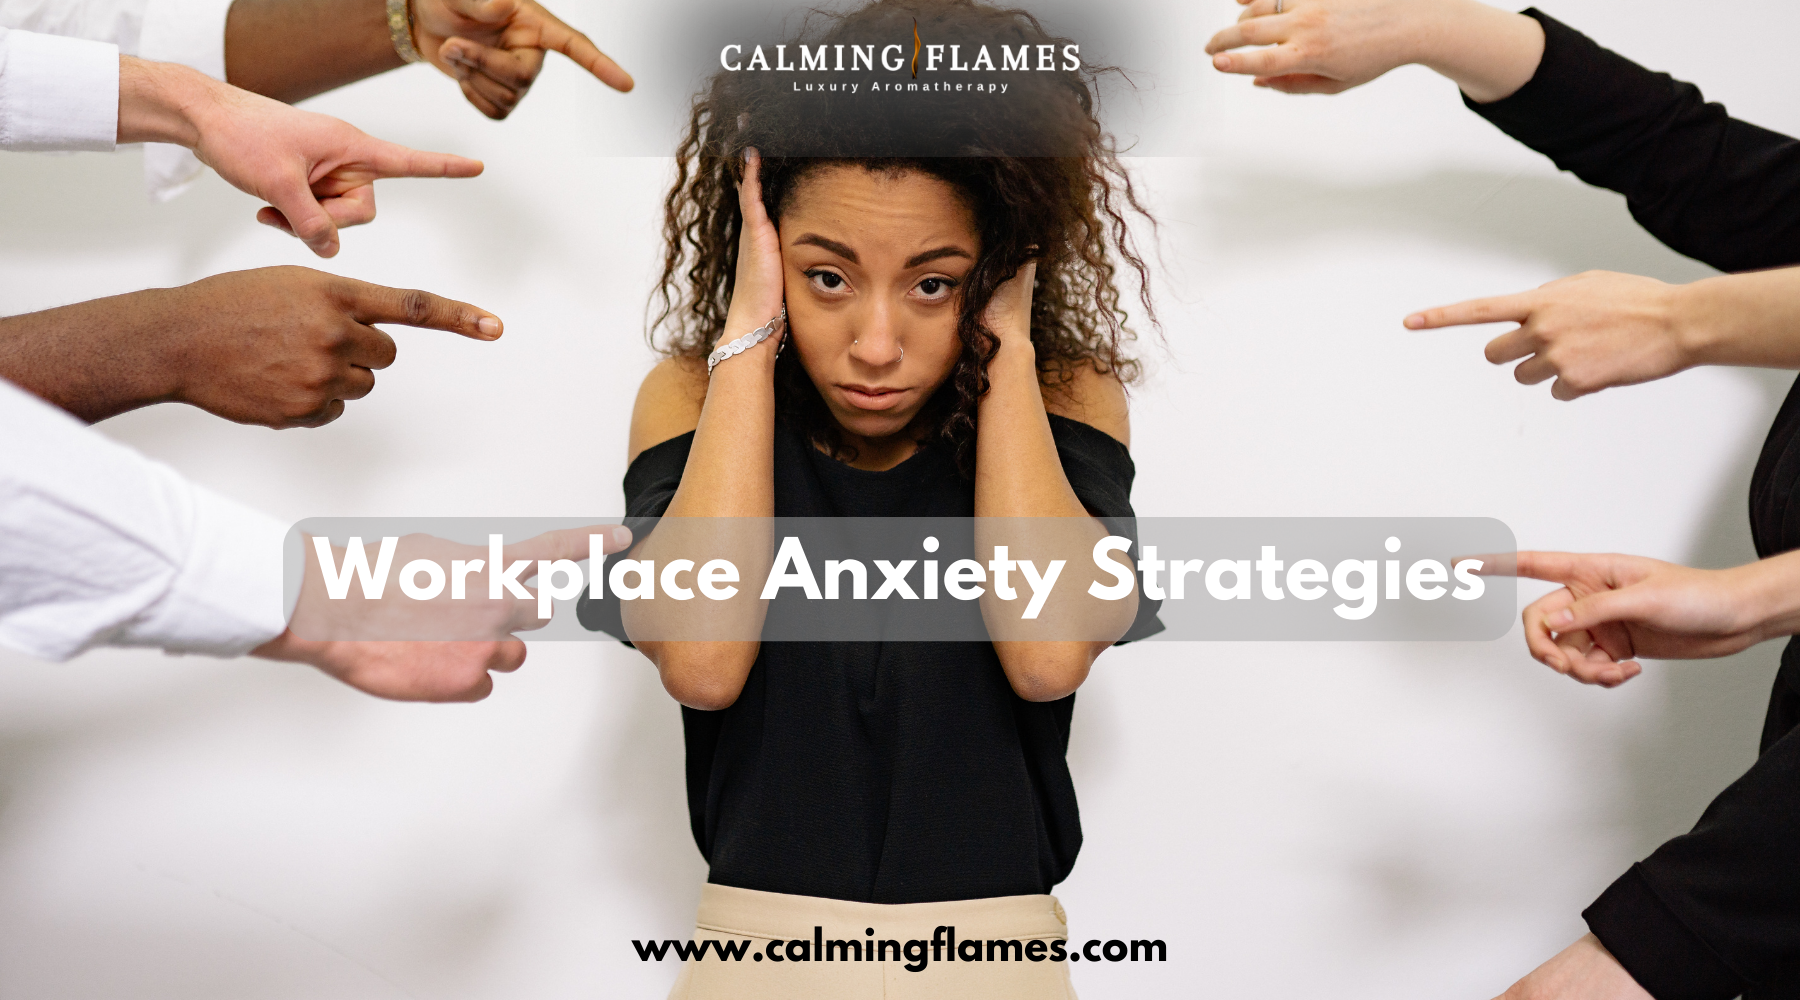 Workplace Anxiety: Strategies for a Healthier, More Productive Work Environment